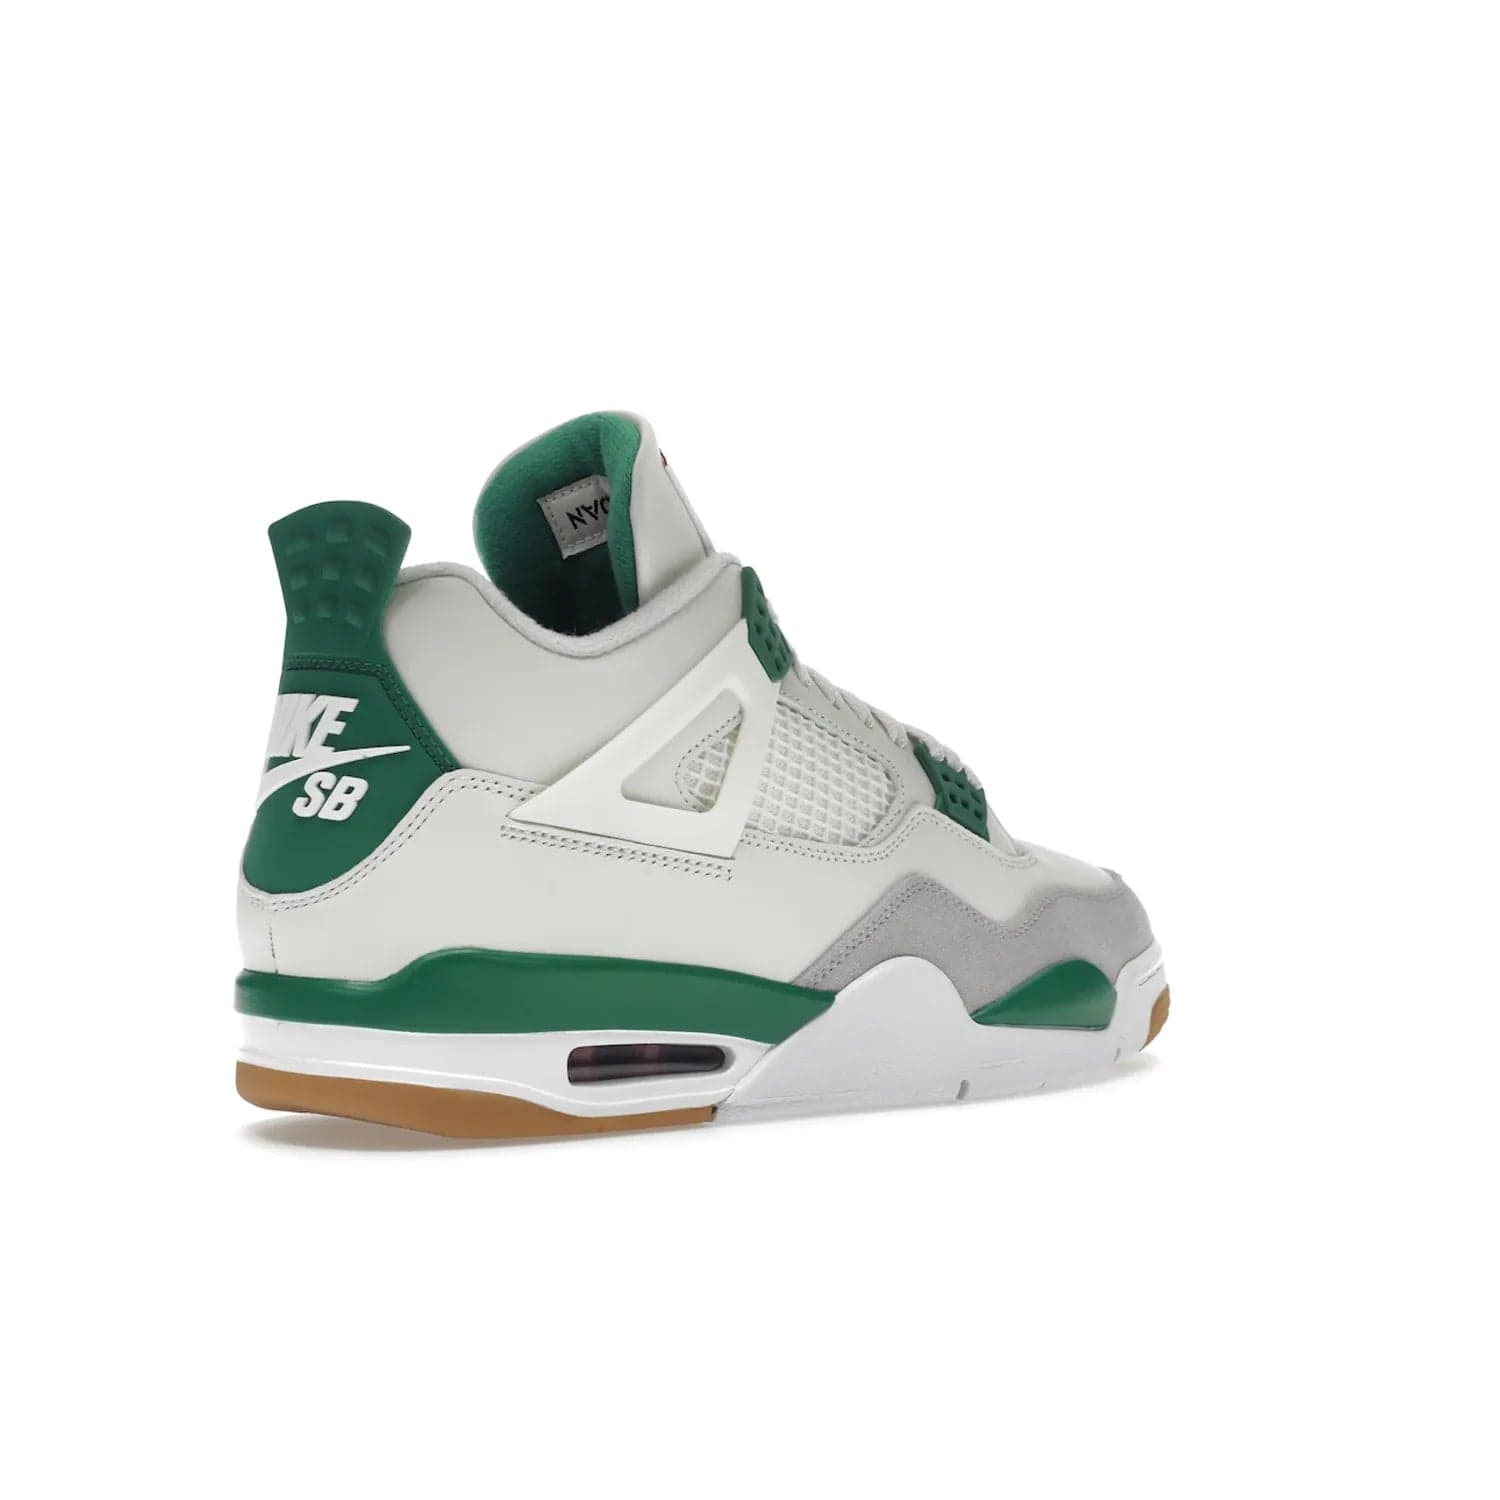 Jordan 4 Retro SB Pine Green - Image 33 - Only at www.BallersClubKickz.com - A white leather upper combined with a Neutral Grey suede mudguard gives this limited Air Jordan 4 Retro SB Pine Green sneaker its unmistakable style. Released March 20, 2023, the Jordan 4 Retro SB features a white and Pine Green midsole plus a red air unit with a gum outsole for grip. The perfect blend of Nike SB skateboarding and Jordan 4 classic design.